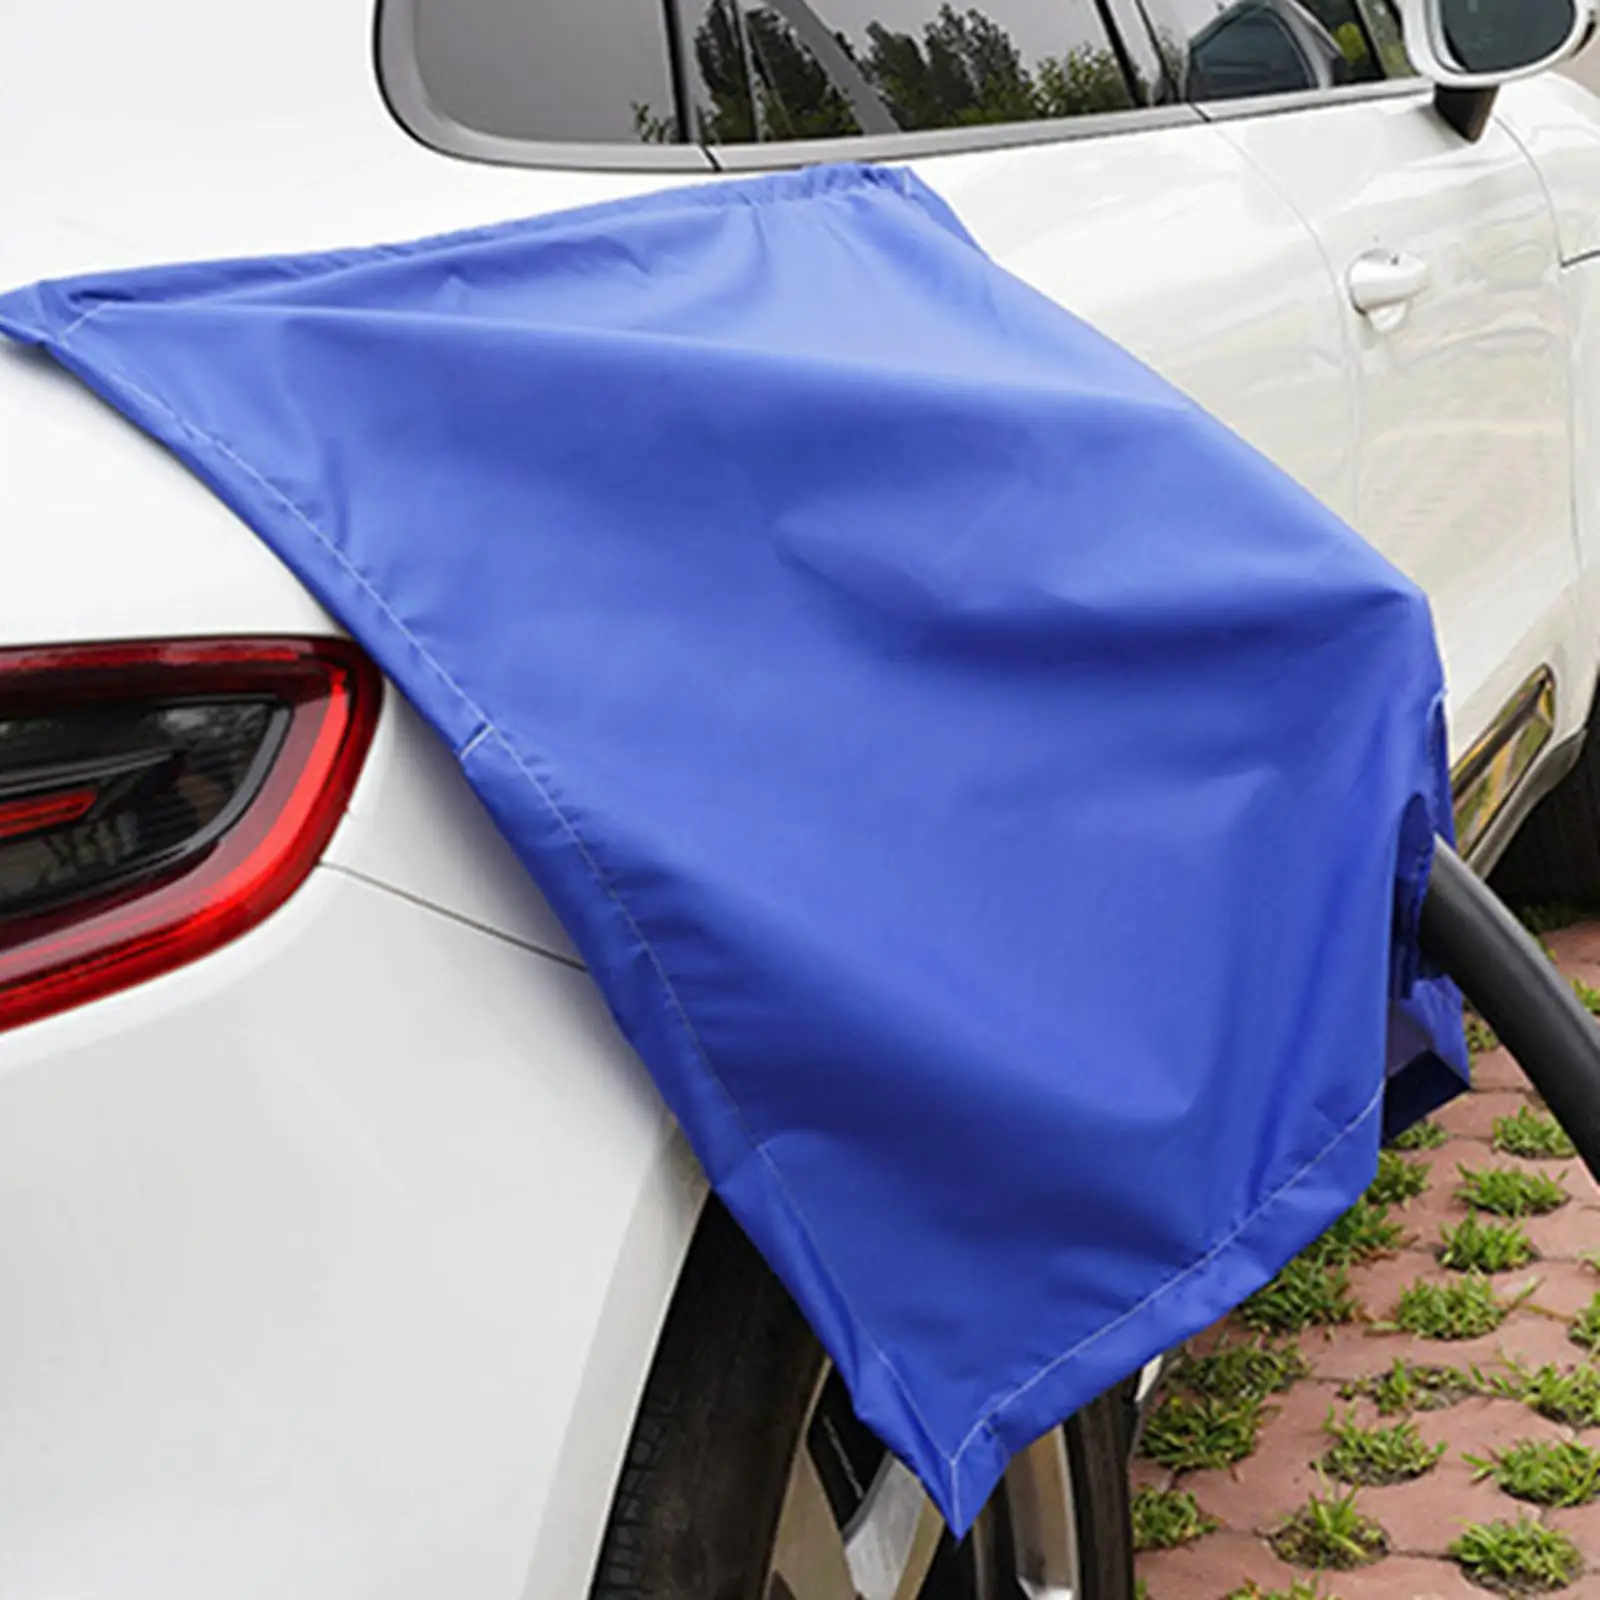 New  Vehicle Charging Waterproof Cloth for  Car ic Attachment Square Outdoor Rain Cover for  Car